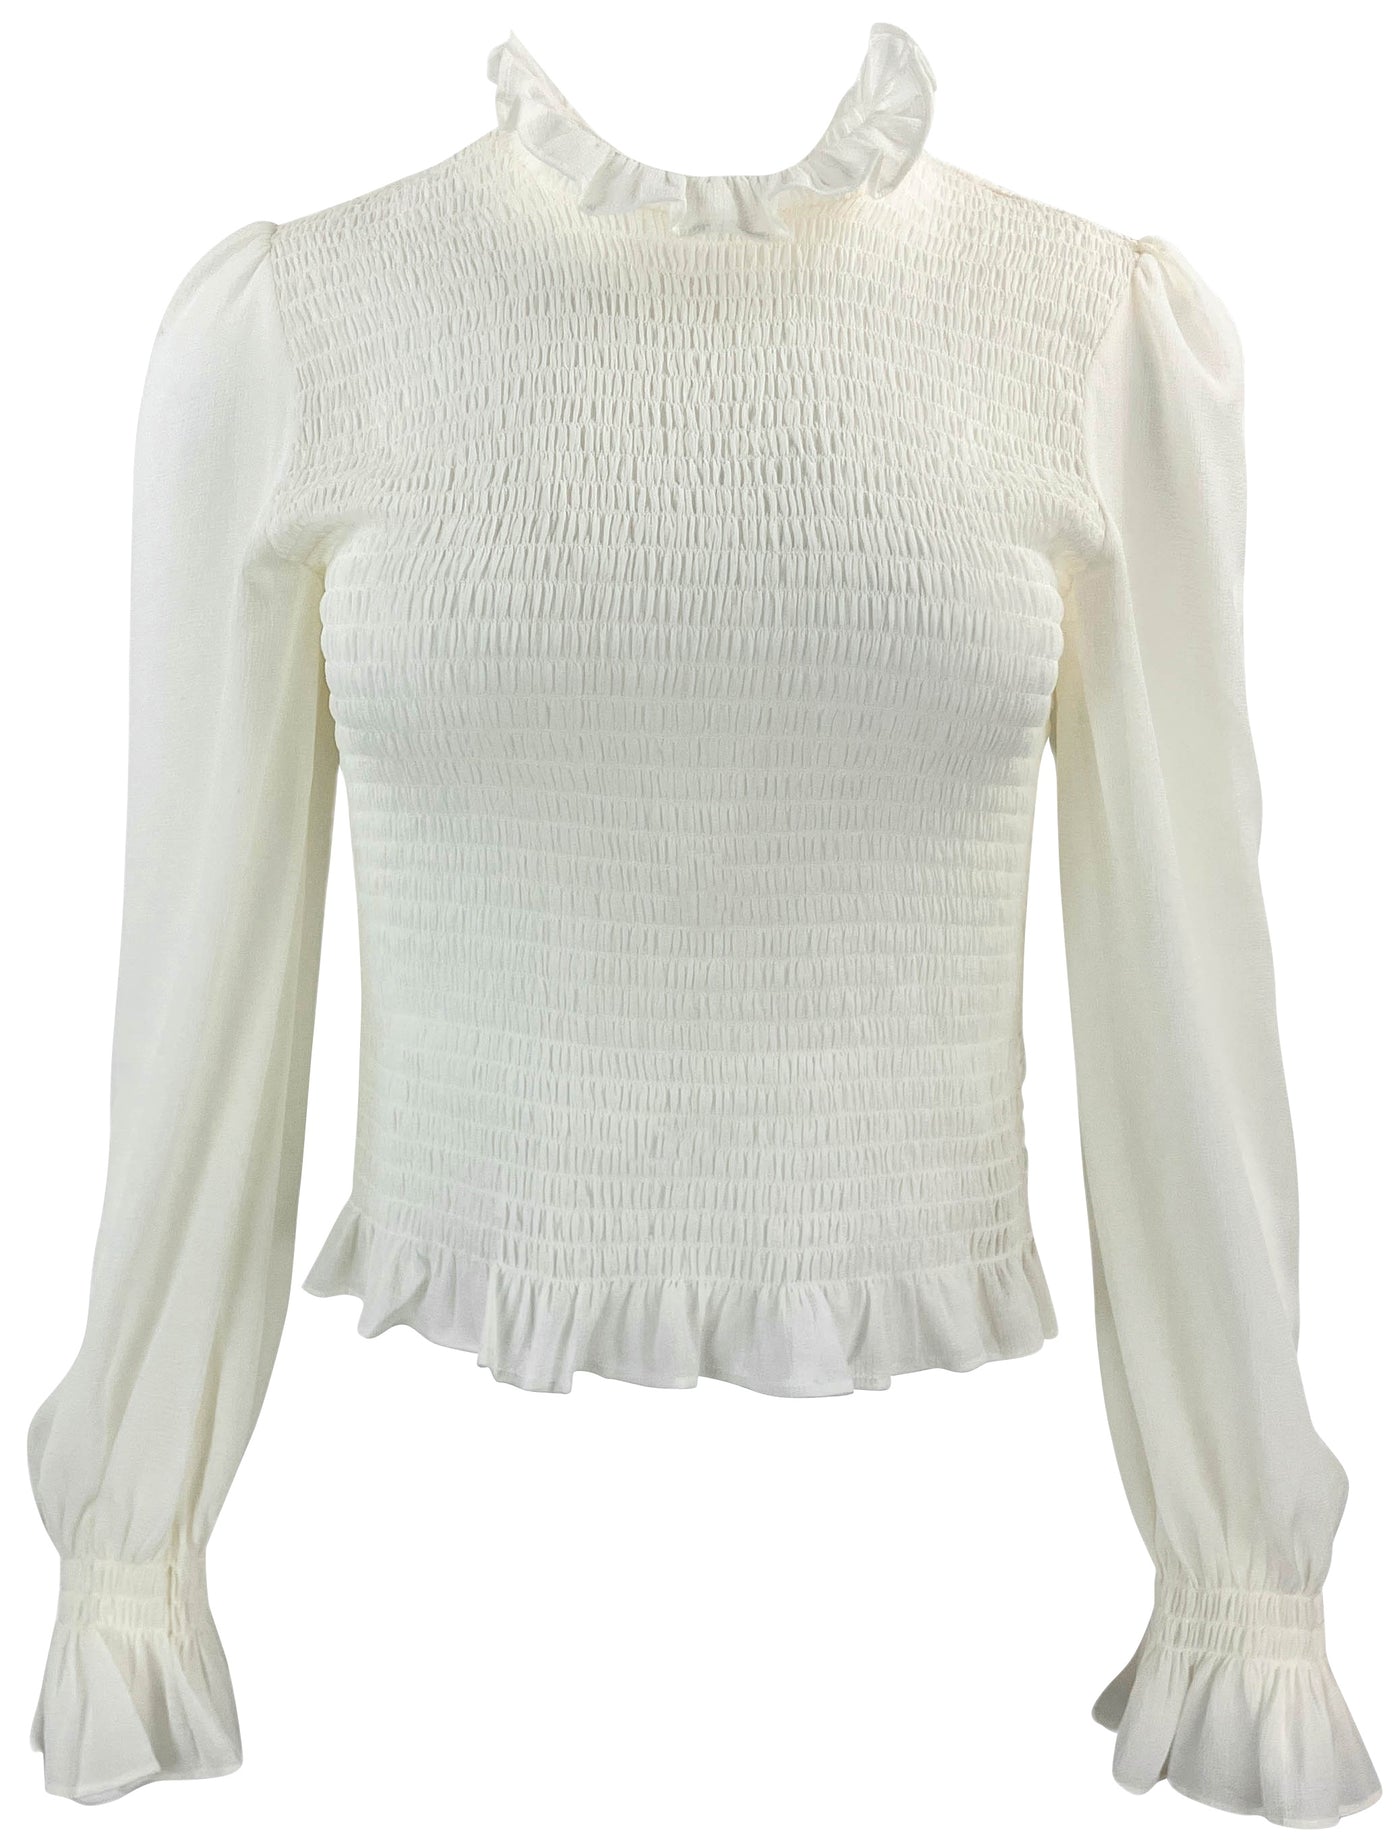 Chloé Victorian Blouse in Cloudy White - Discounts on Chloé at UAL